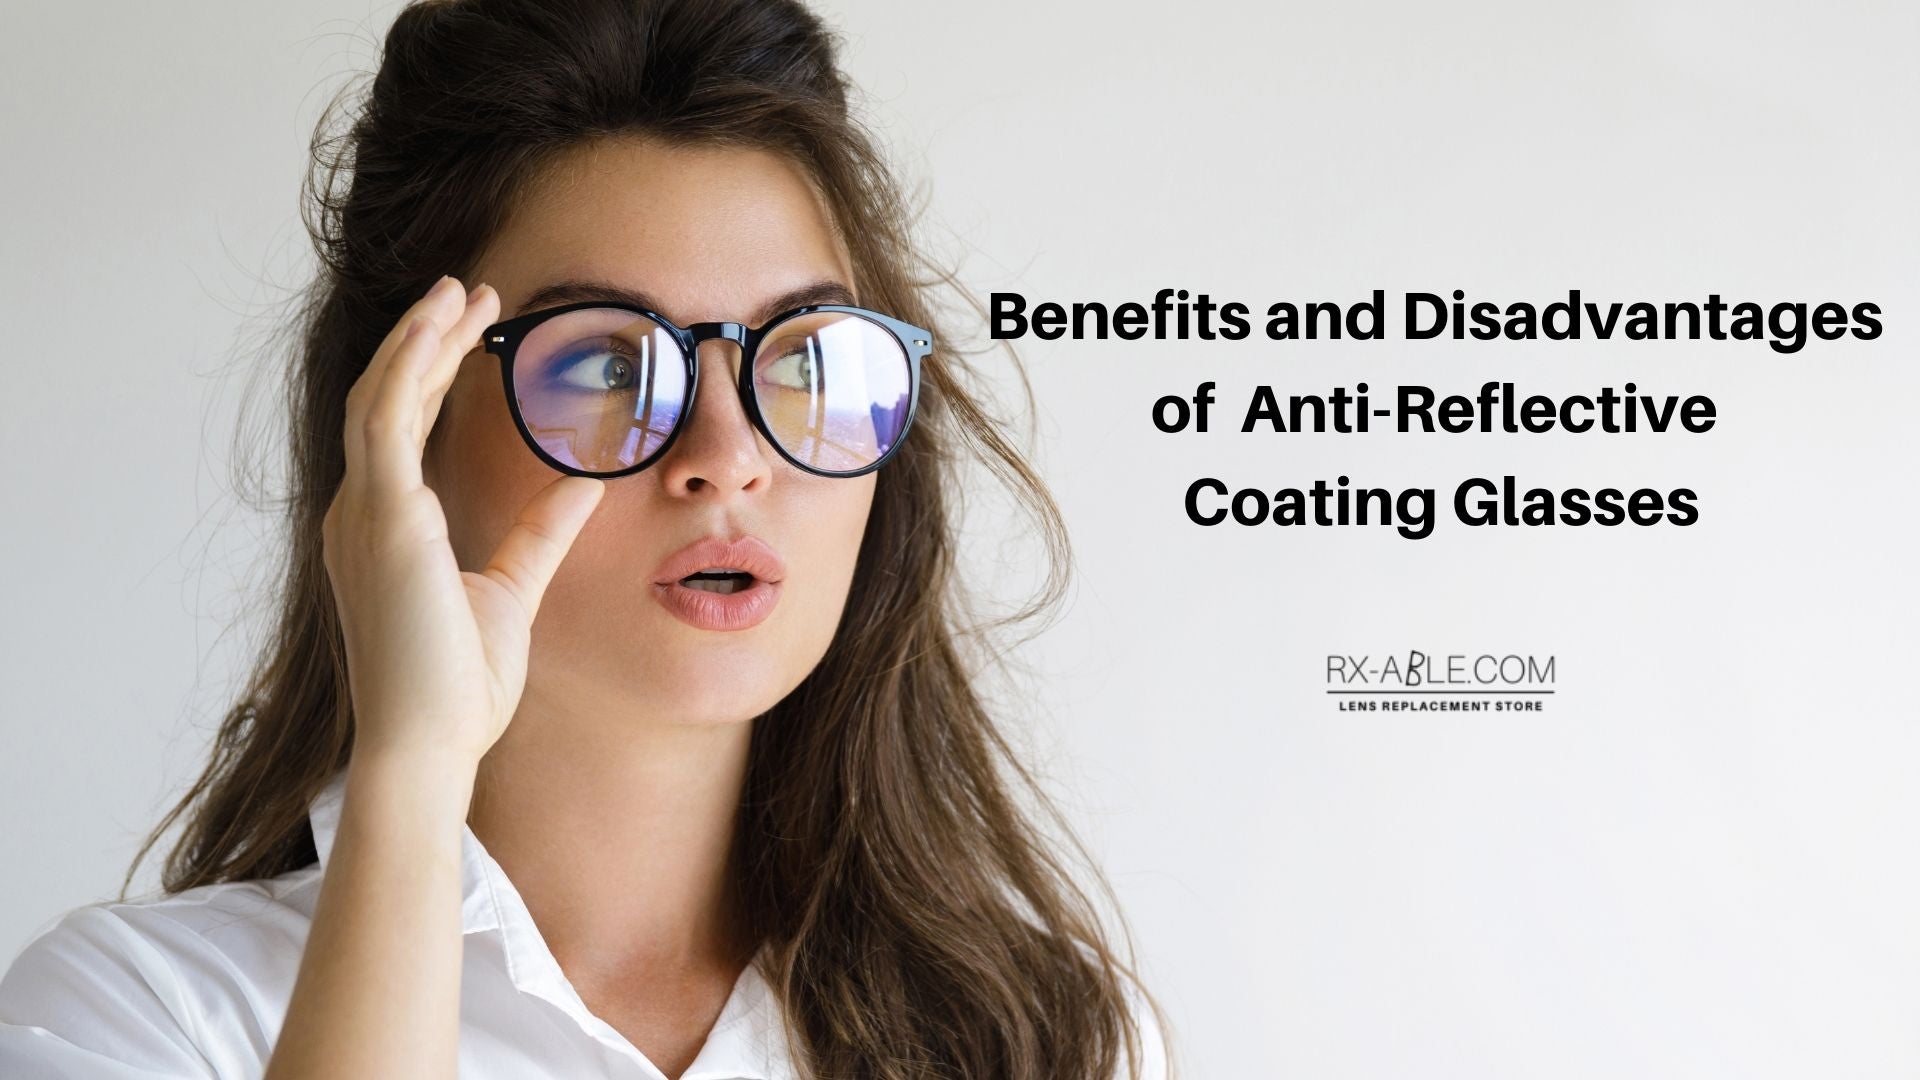 https://www.rx-able.com/cdn/shop/articles/Benefits_and_Disadvantages_of_Anti-reflective_Coating_Glasses_1920x.jpg?v=1623905182